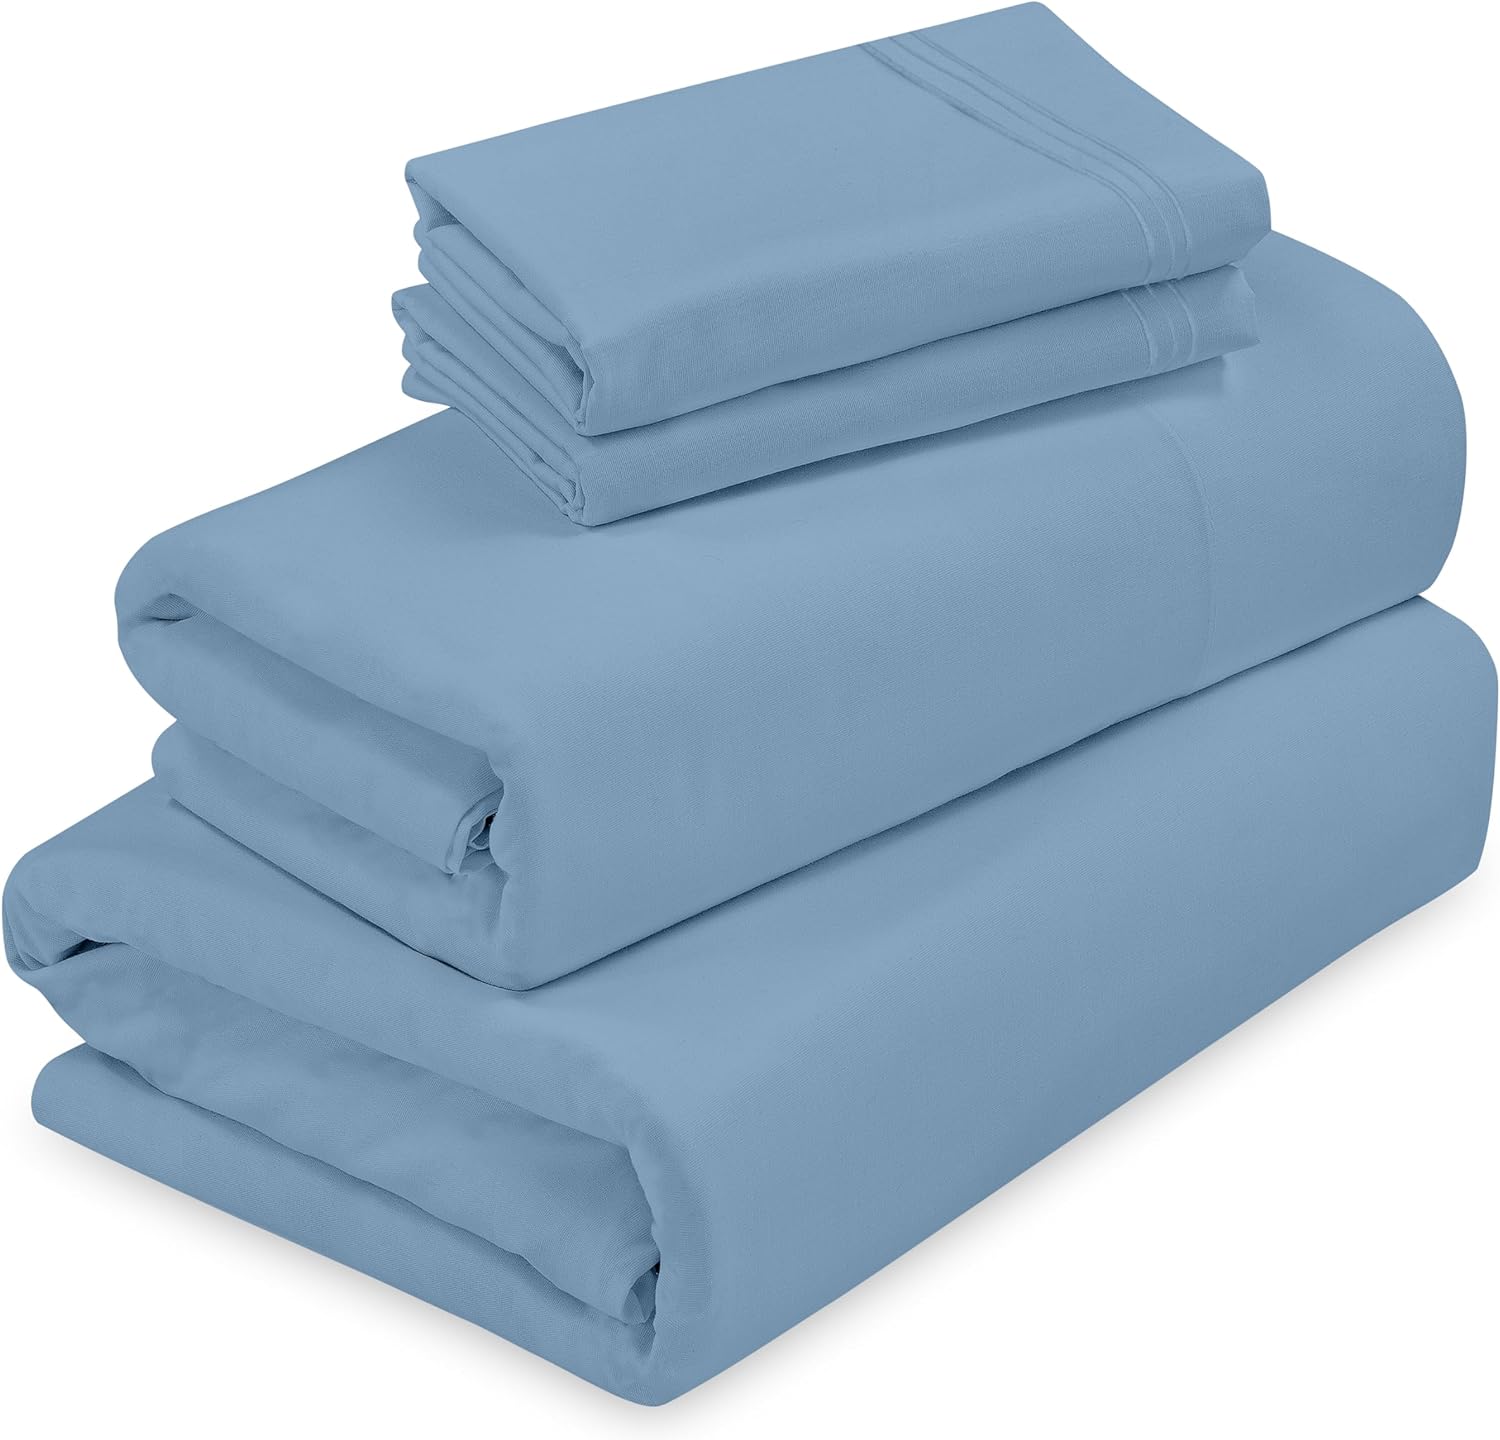 Royale Linens - 4 Piece Queen Bed Sheet - Soft Brushed Microfiber 1800 Bedding Set - 1 Fitted Sheet, 1 Flat Sheet, 2 Pillow Case - Wrinkle & Fade Resistant Luxury Queen Size Sheet Set (Queen,LakeBlue)